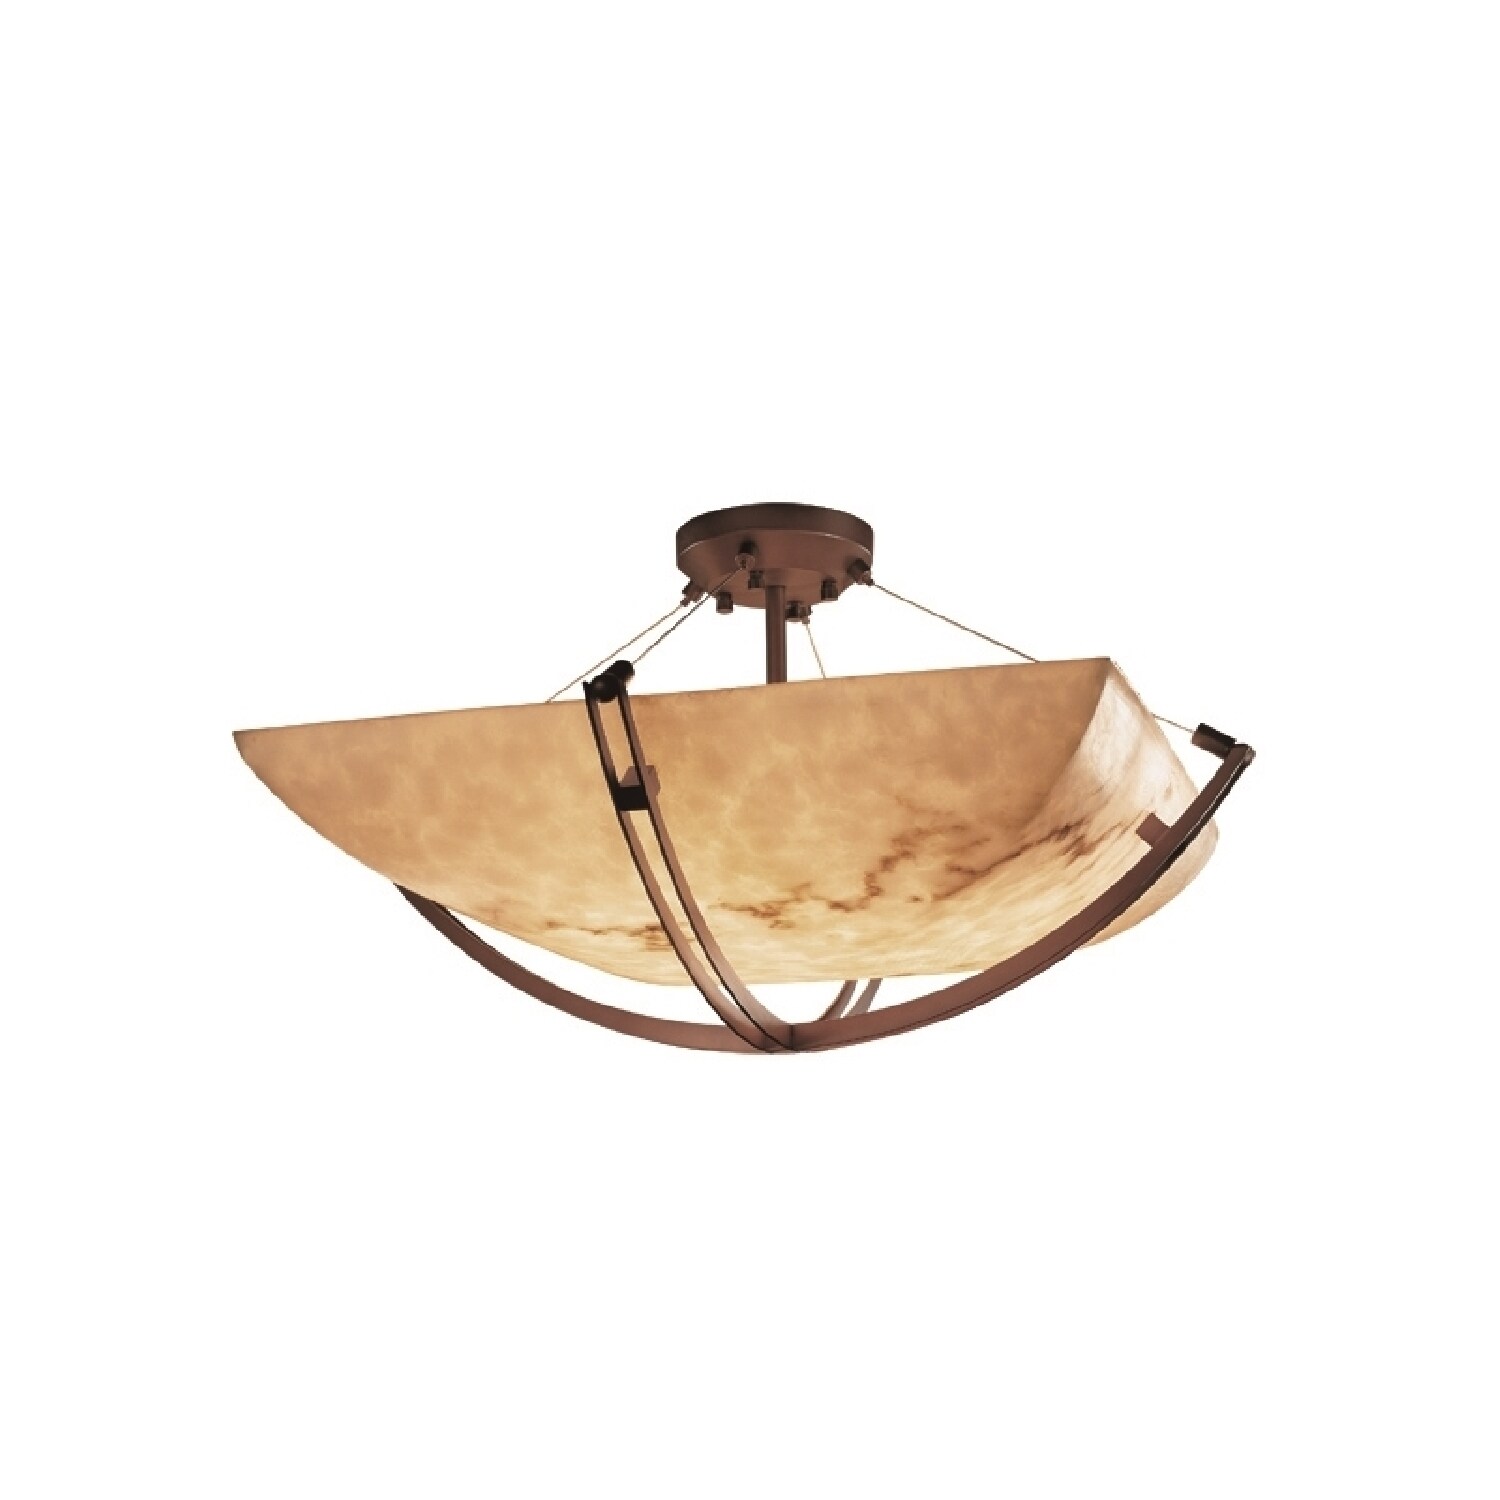 Justice Design Group LumenAria 2-Light Semi-Flush Incandescent Brushed Nickel Finish with Faux Alabaster Resin Shade 